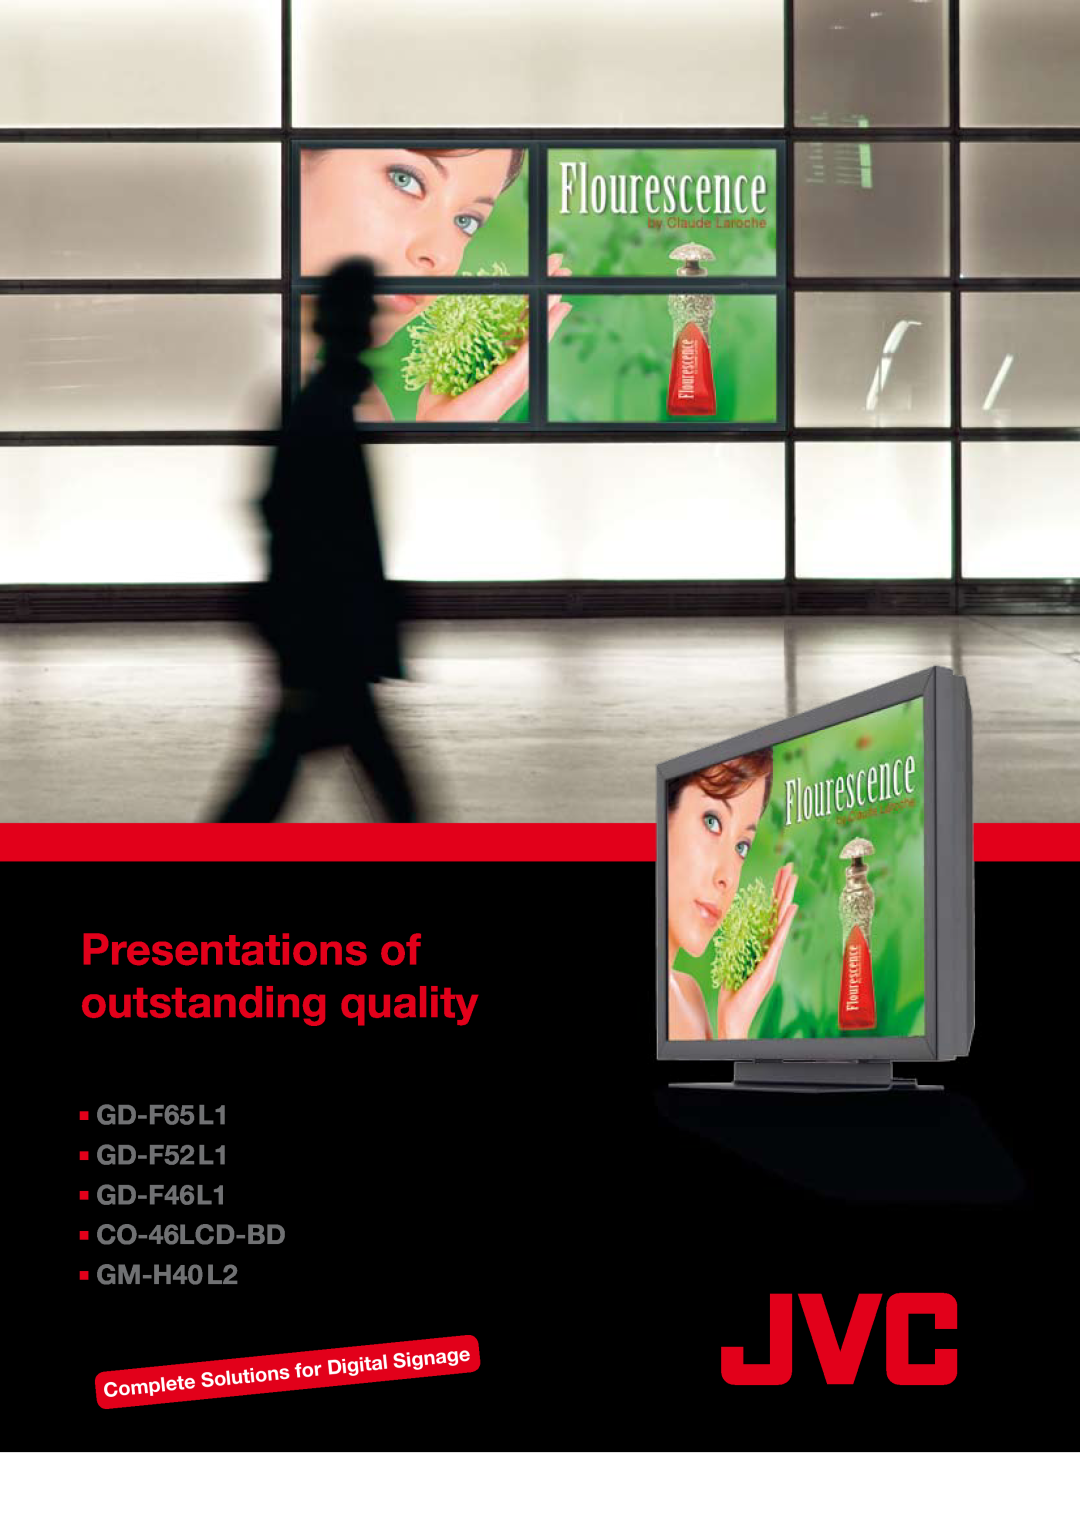 JVC GD-F65L1, CO-46LCD-BD manual Presentations of outstanding quality, JVC Professional high definition LCD displays 